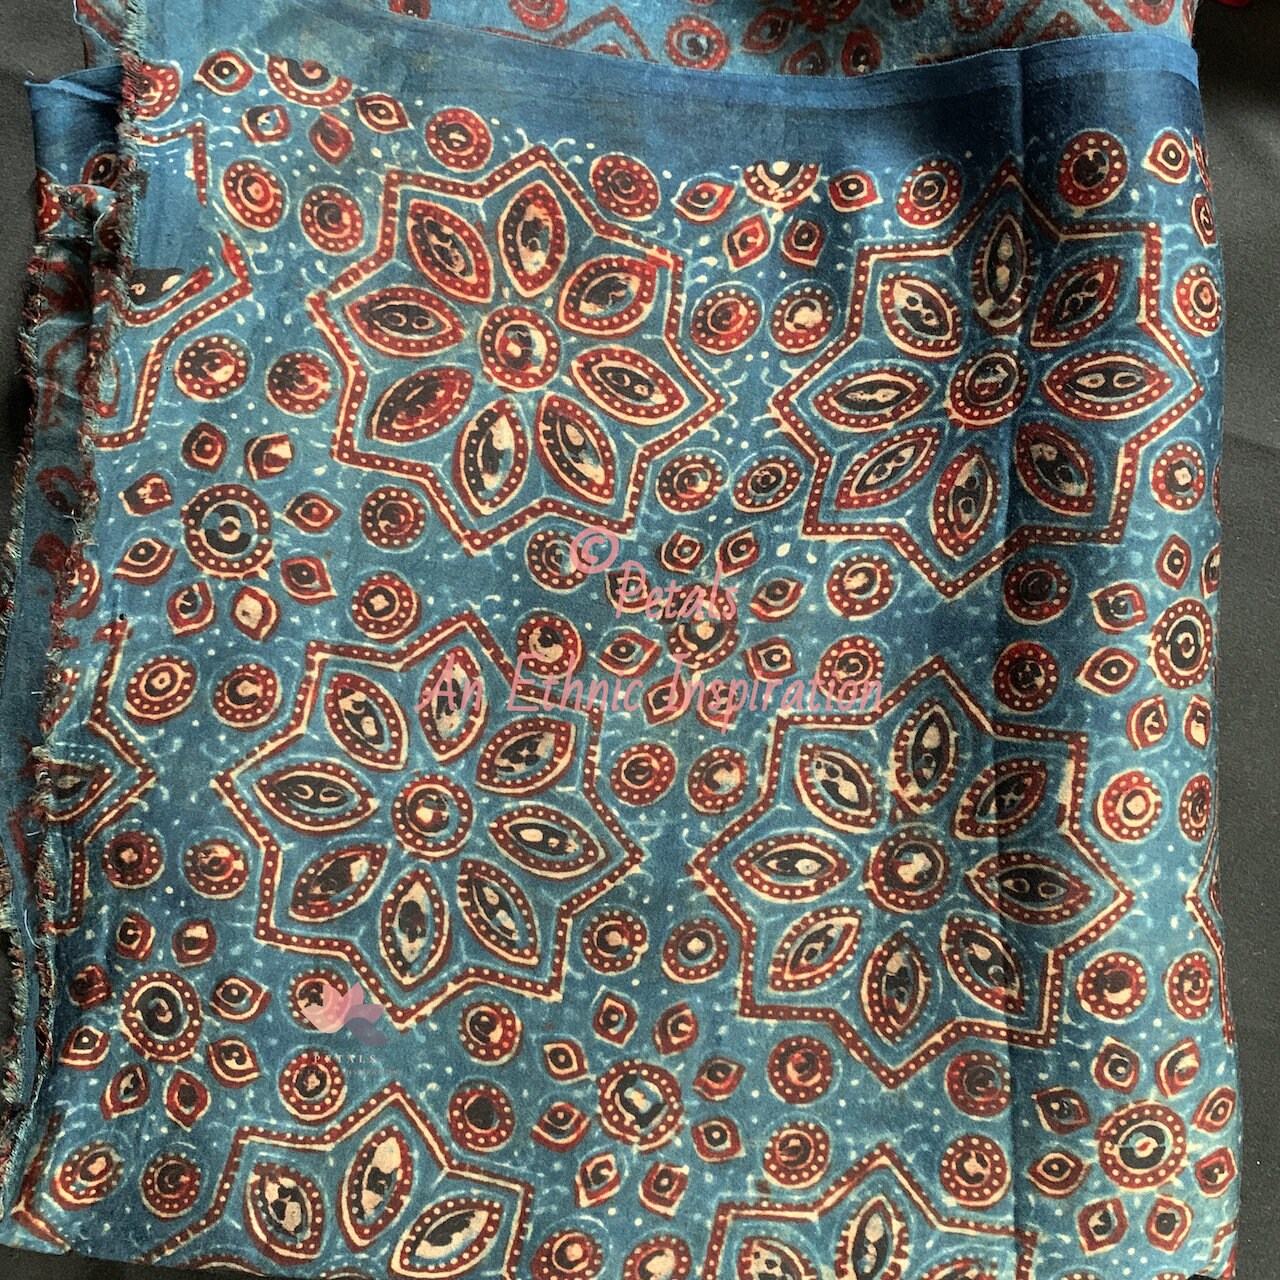 Bandhani with Ajrakh Hand block print with Natural dye on | Etsy